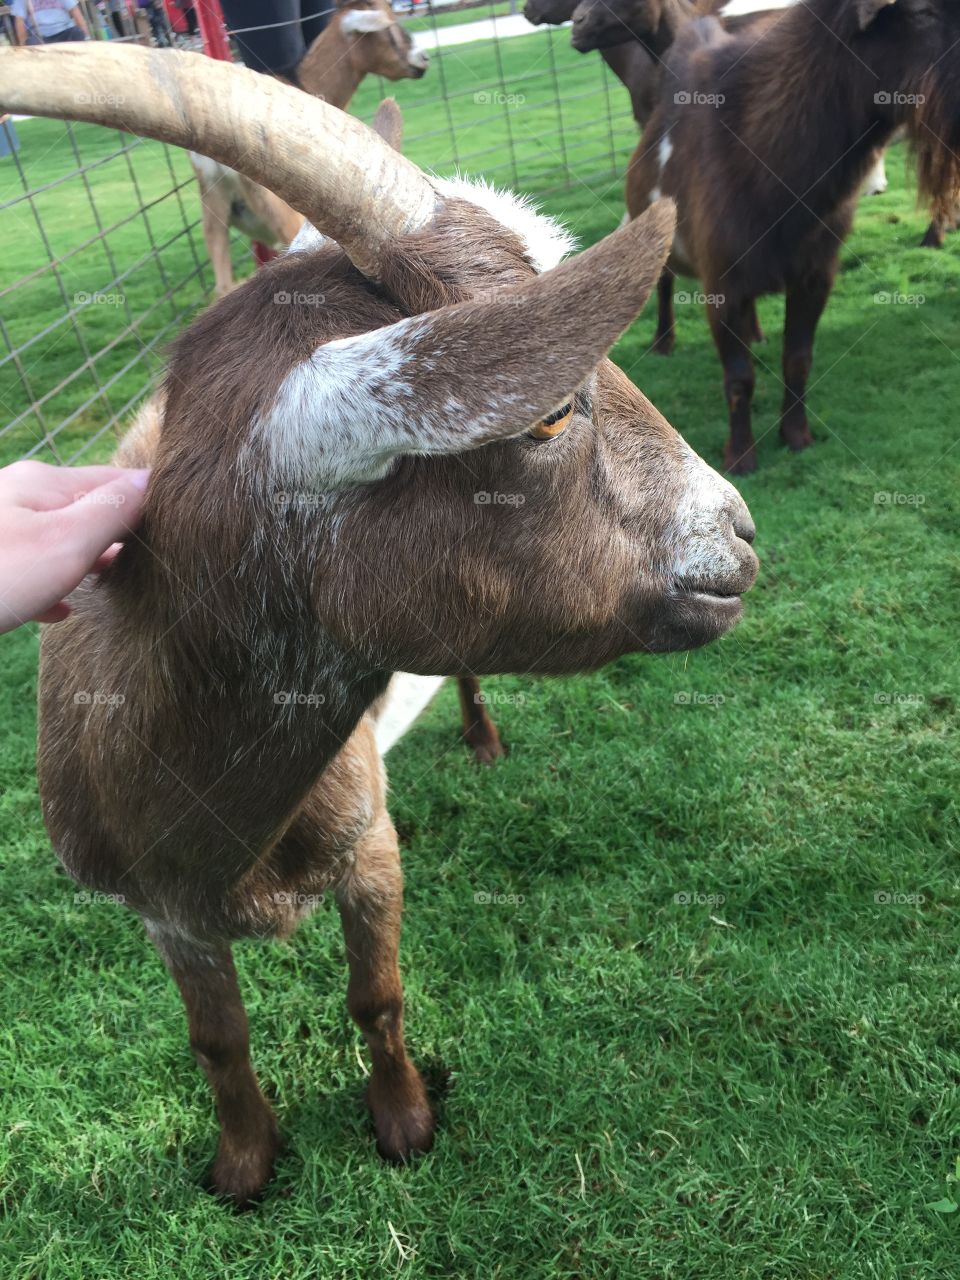 I went to a “yoga with goats” event hosted by Billy Goat Ice Cream in OKC